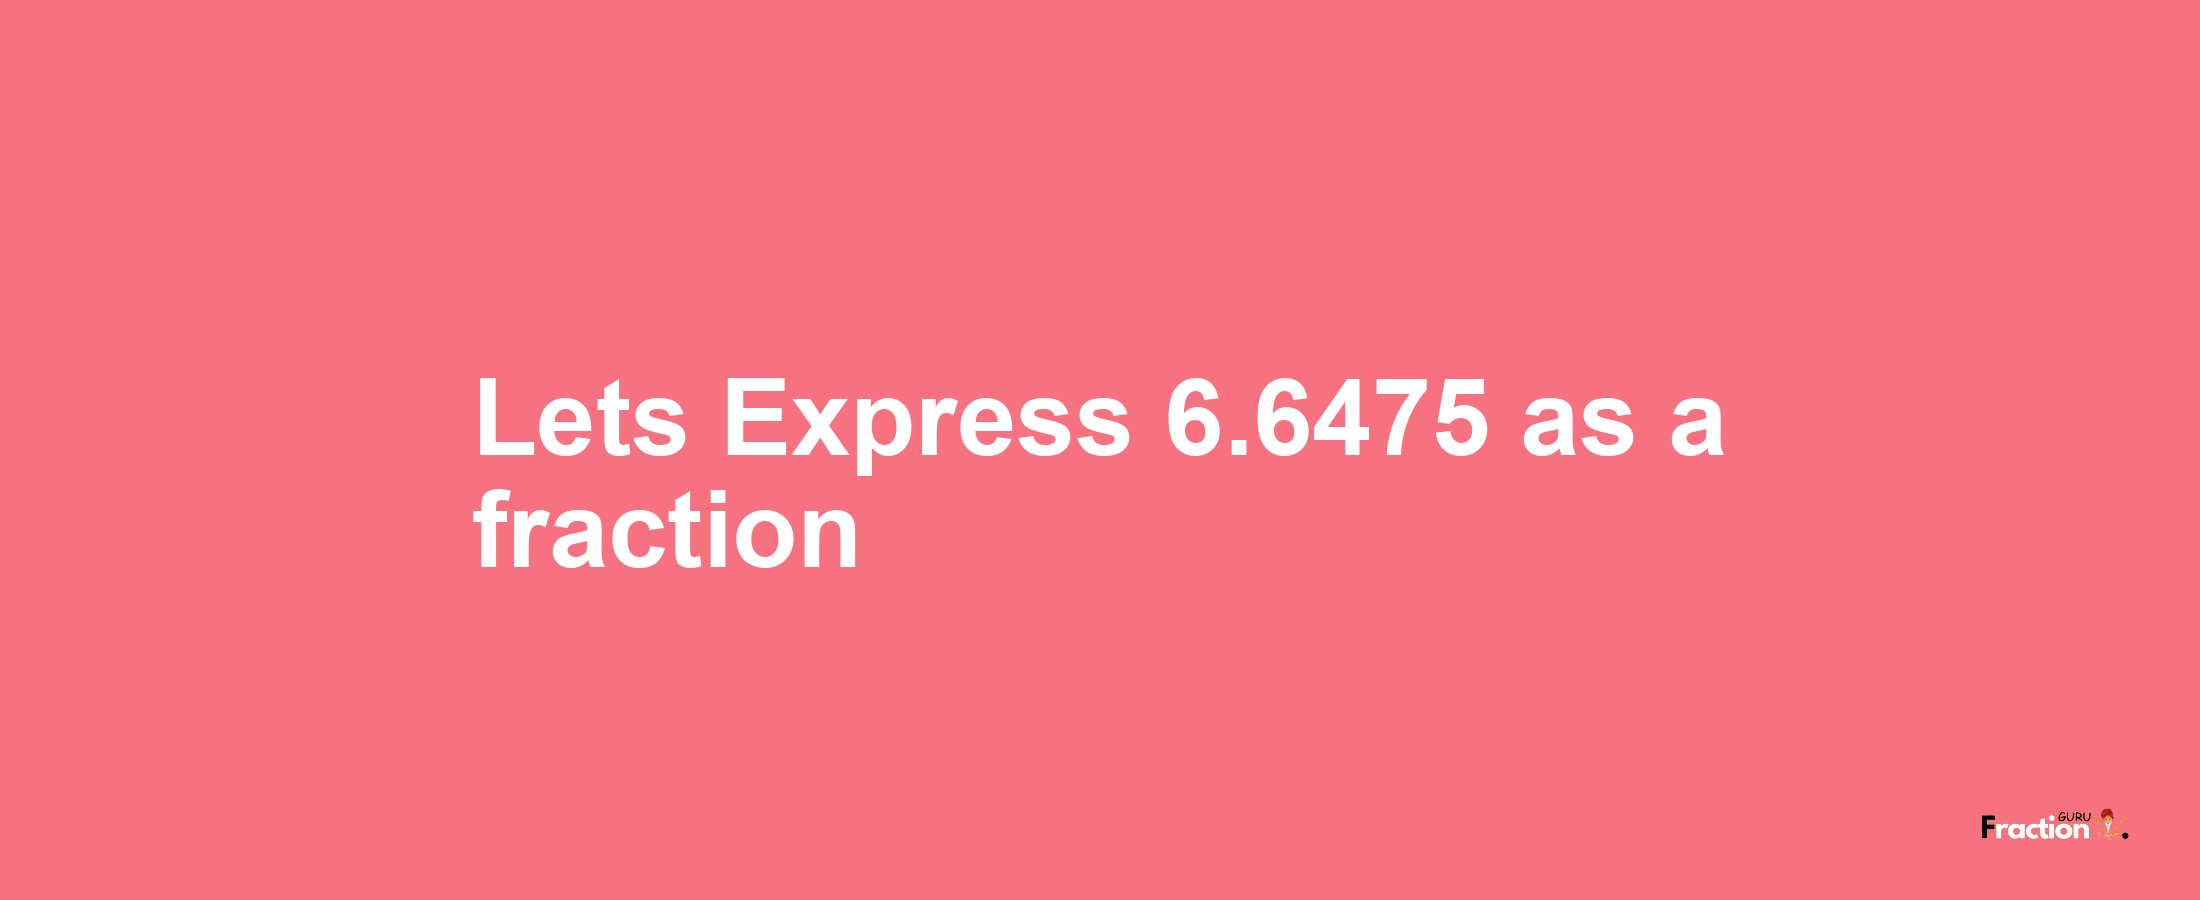 Lets Express 6.6475 as afraction